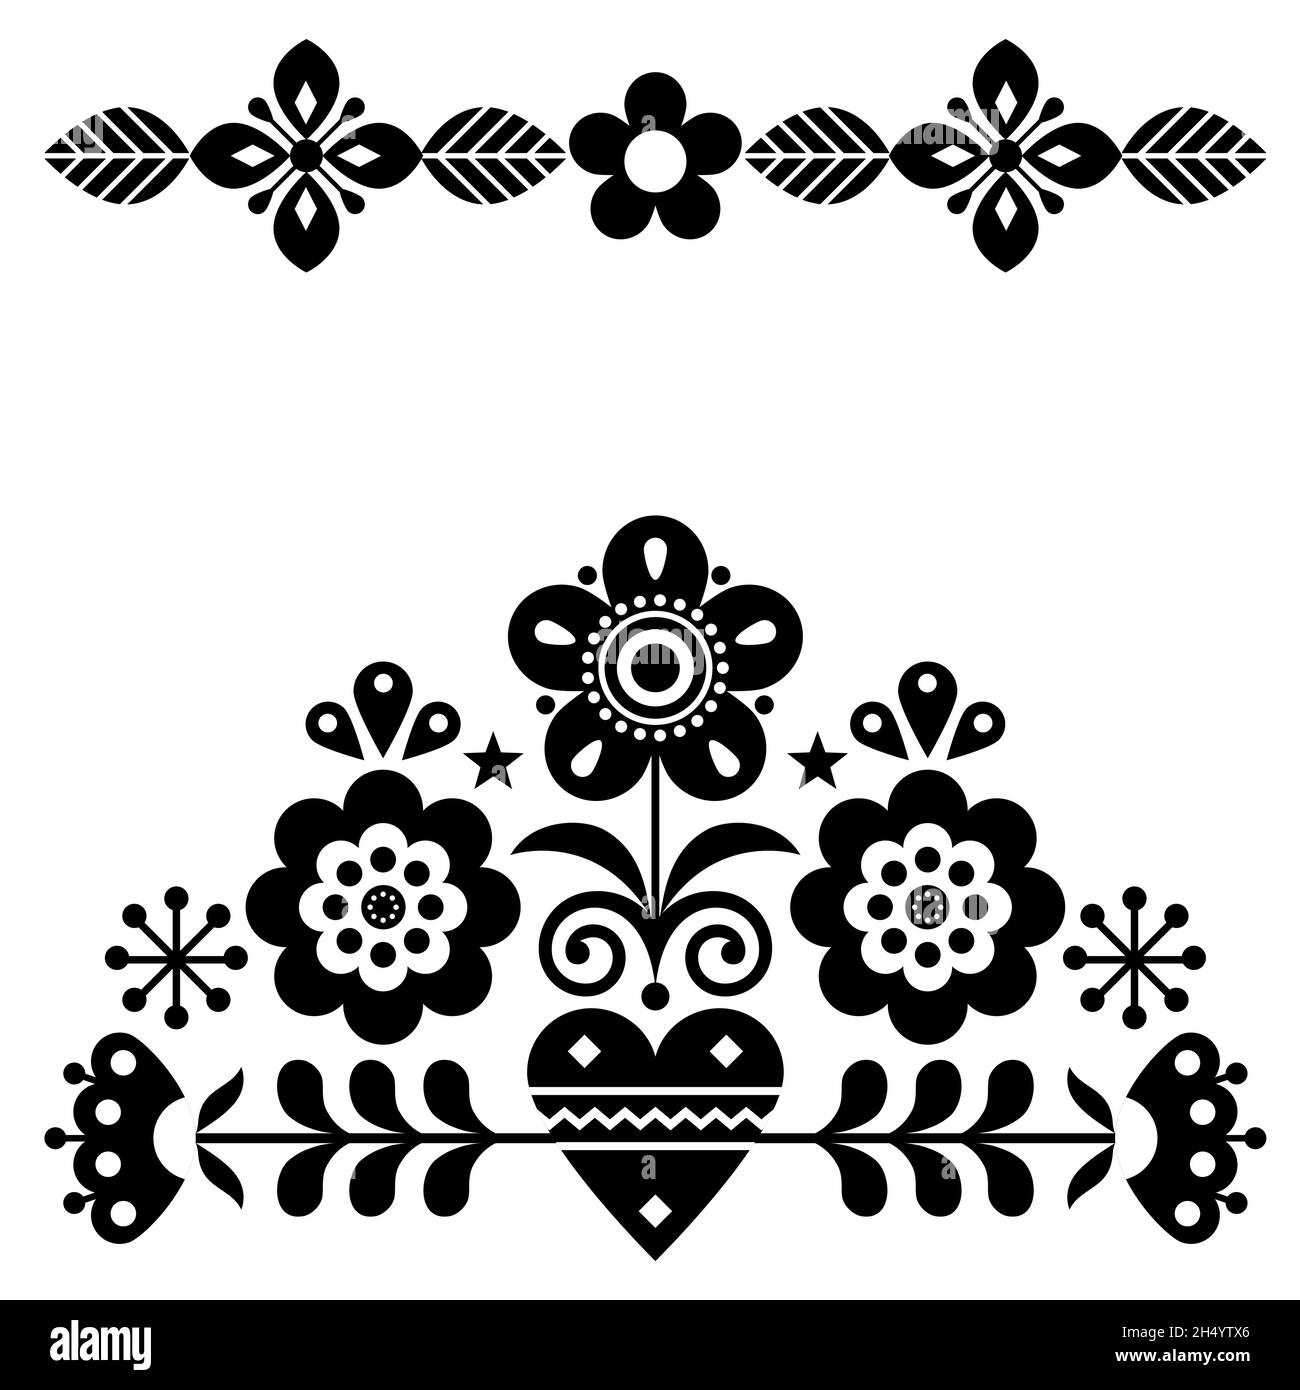 Scandinavian cute folk vector black and white greeting card pattern with flowers, autumn  floral design inspired by traditional embroidery from Sweden Stock Vector